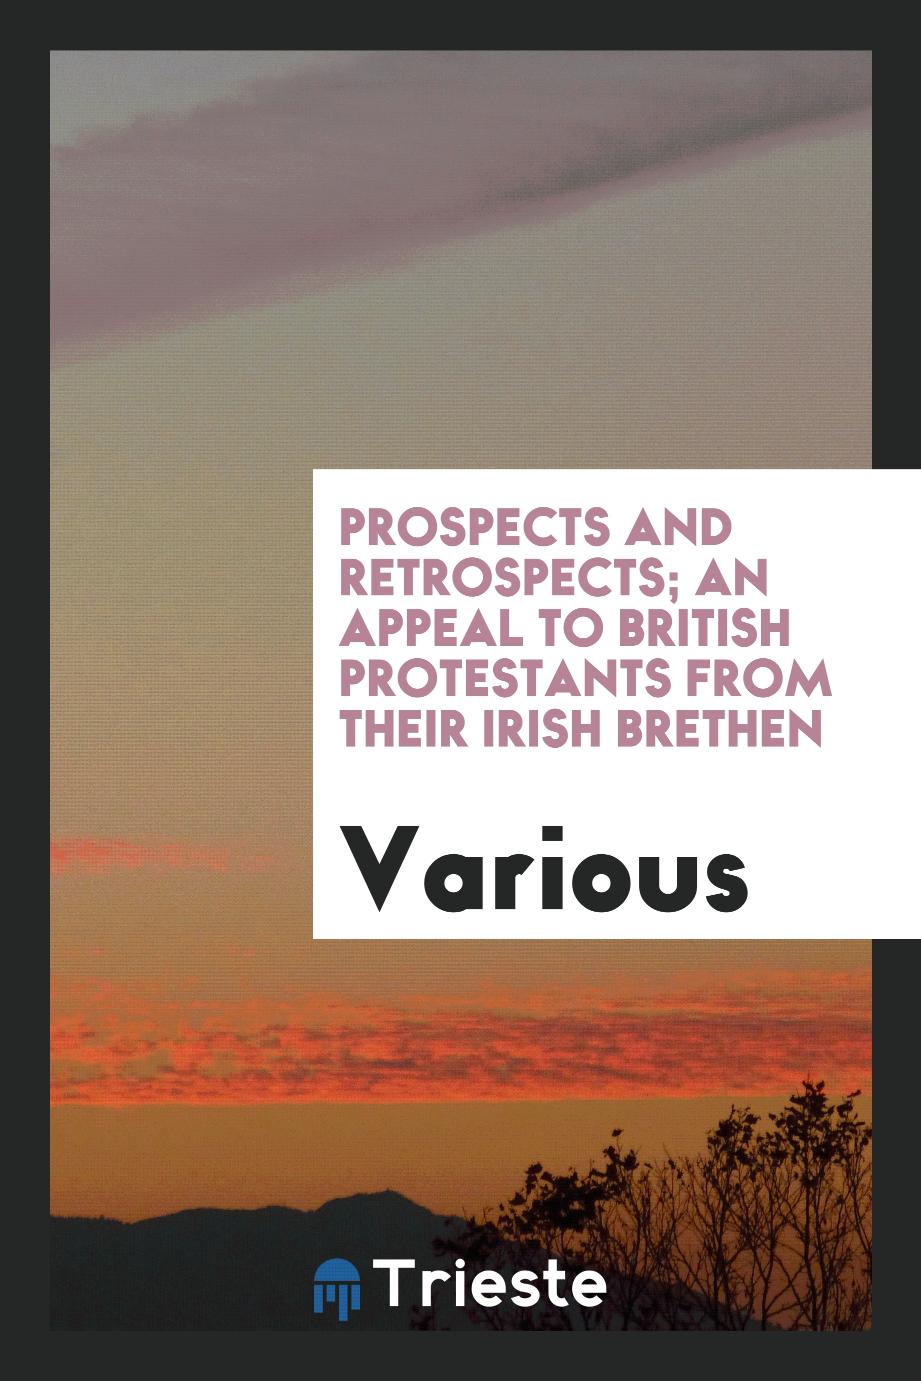 Prospects and retrospects; an appeal to British protestants from their Irish Brethen